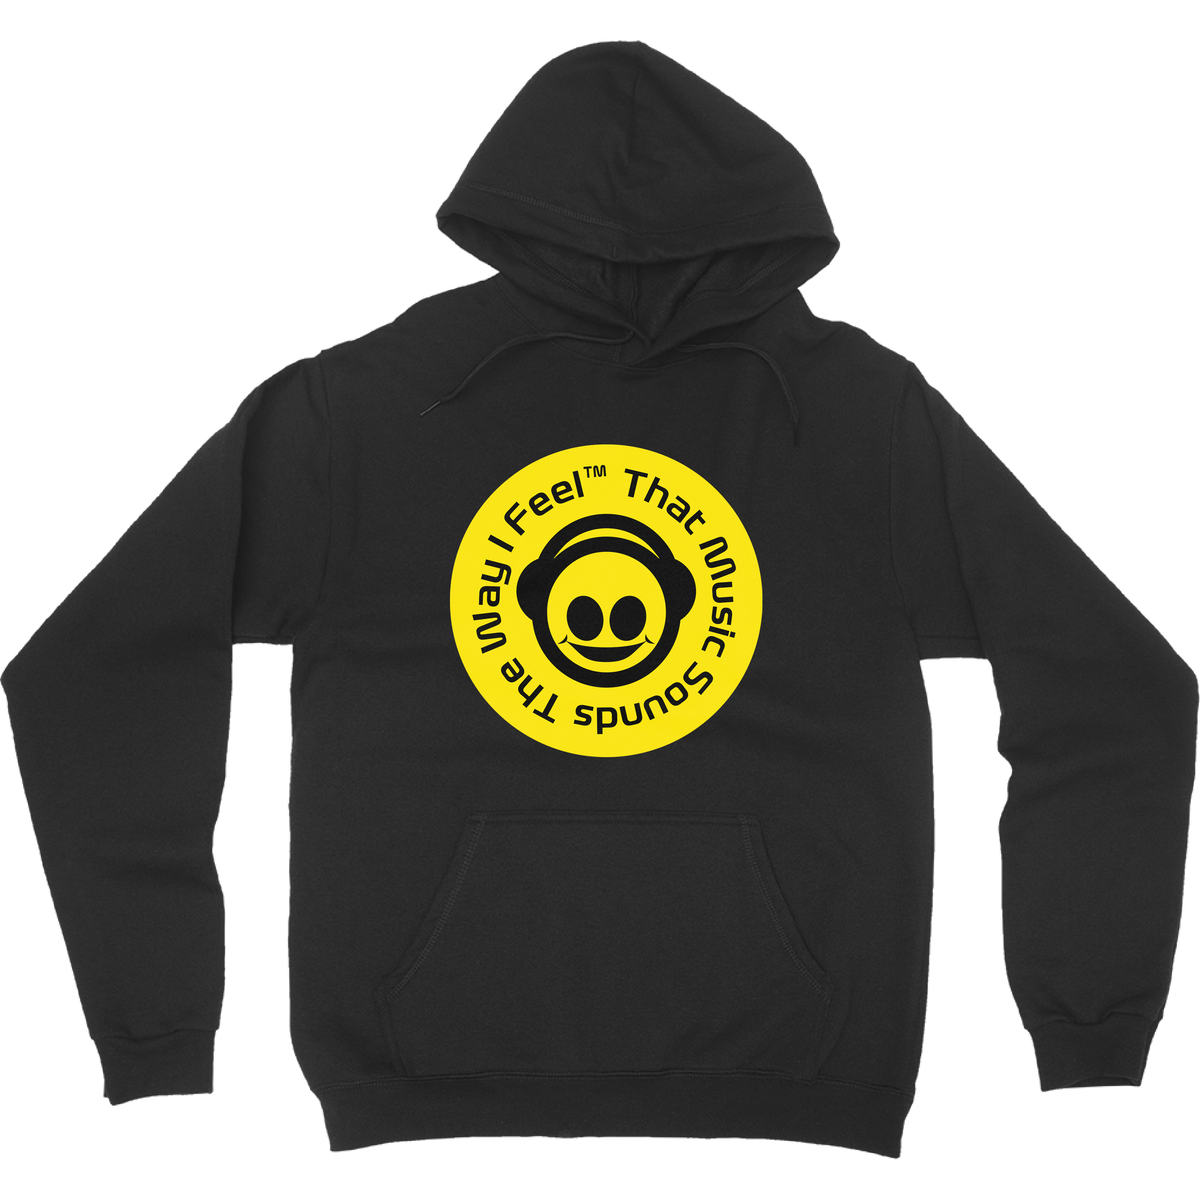 Danny L Harle - 'That Music Sounds The Way I Feel' Hoodie